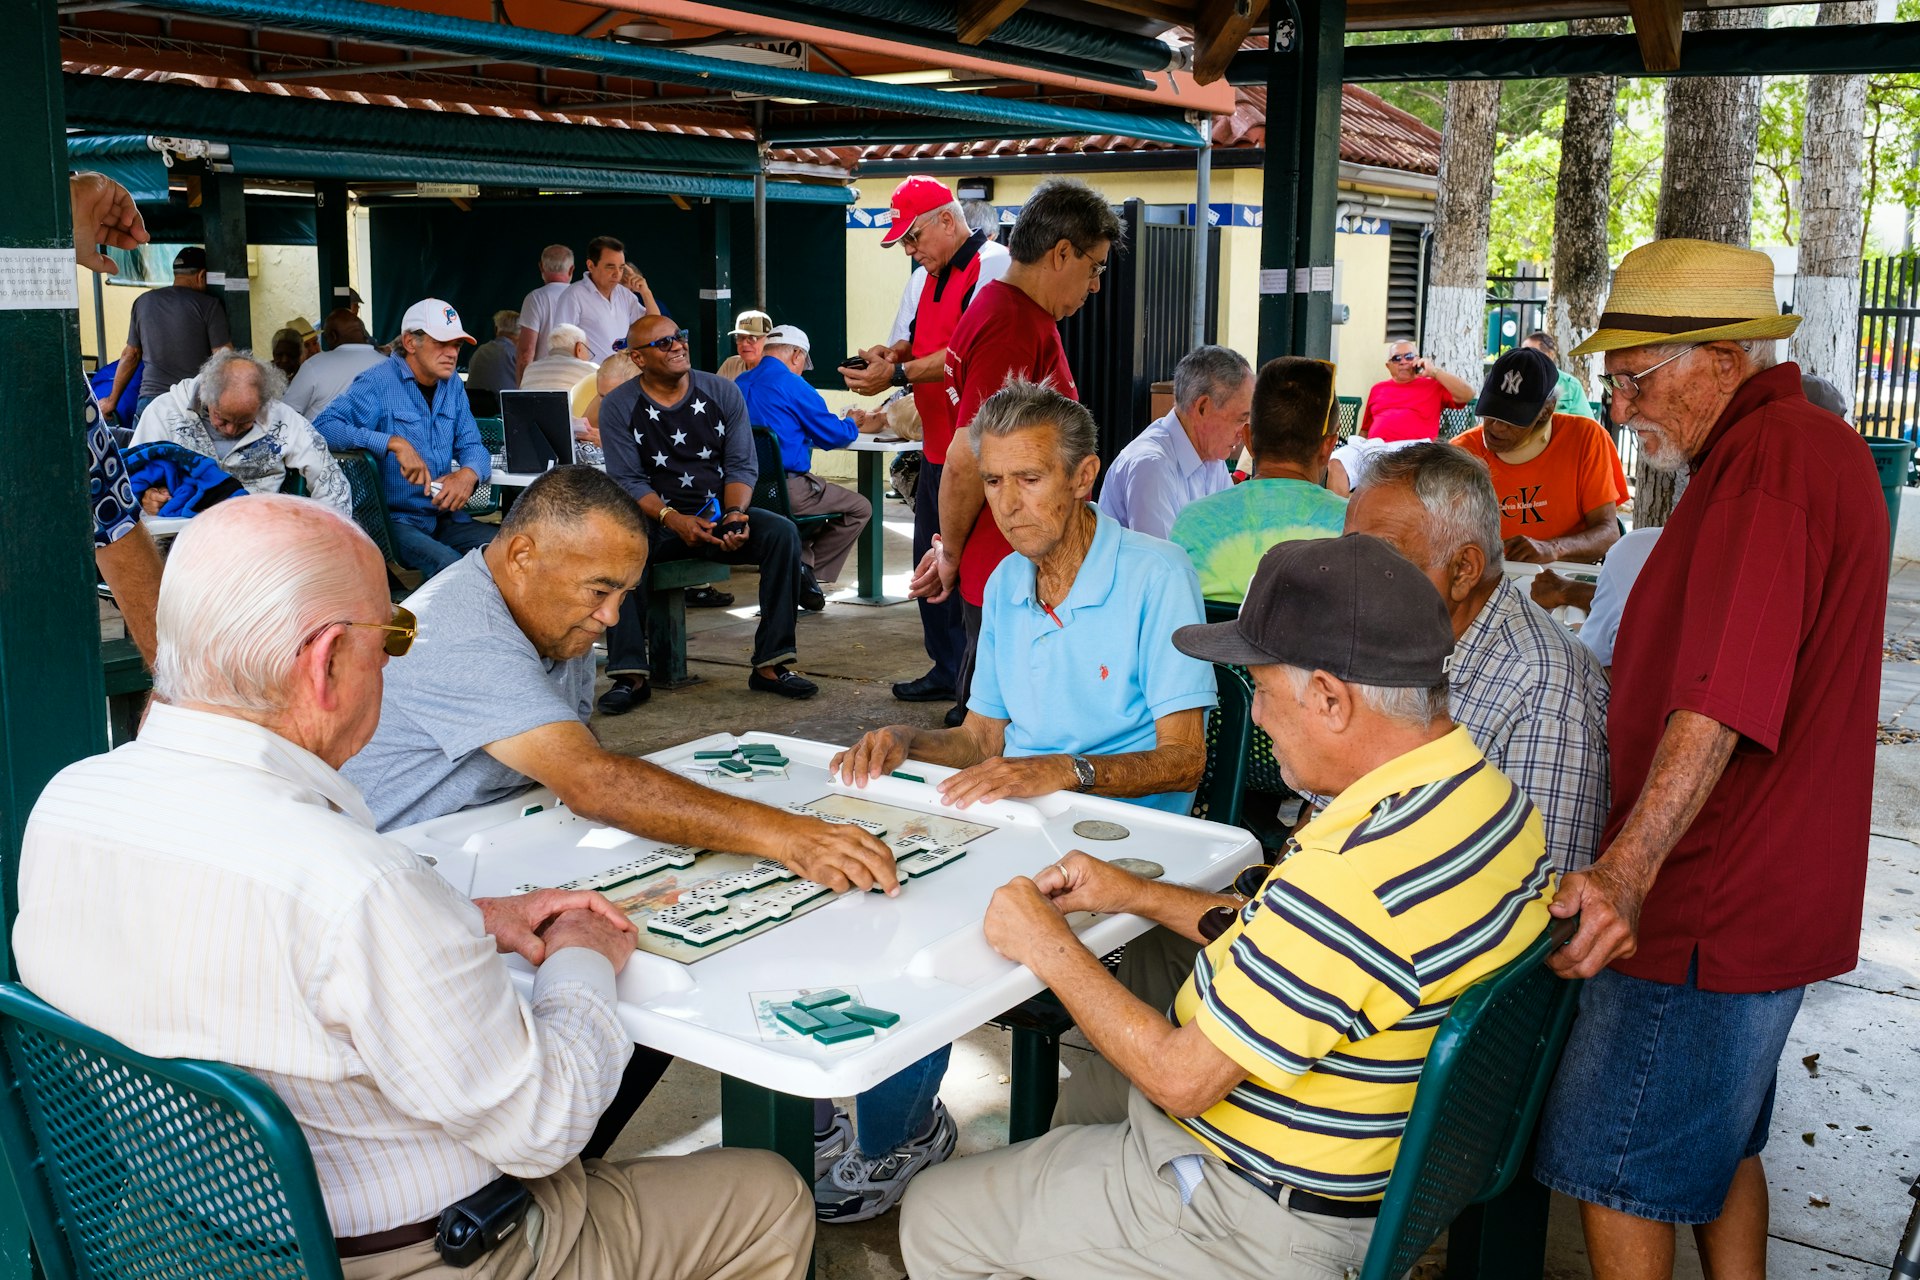 A group of older men play dominos in Domino Park, Little Havana, Miami, Florida, USA